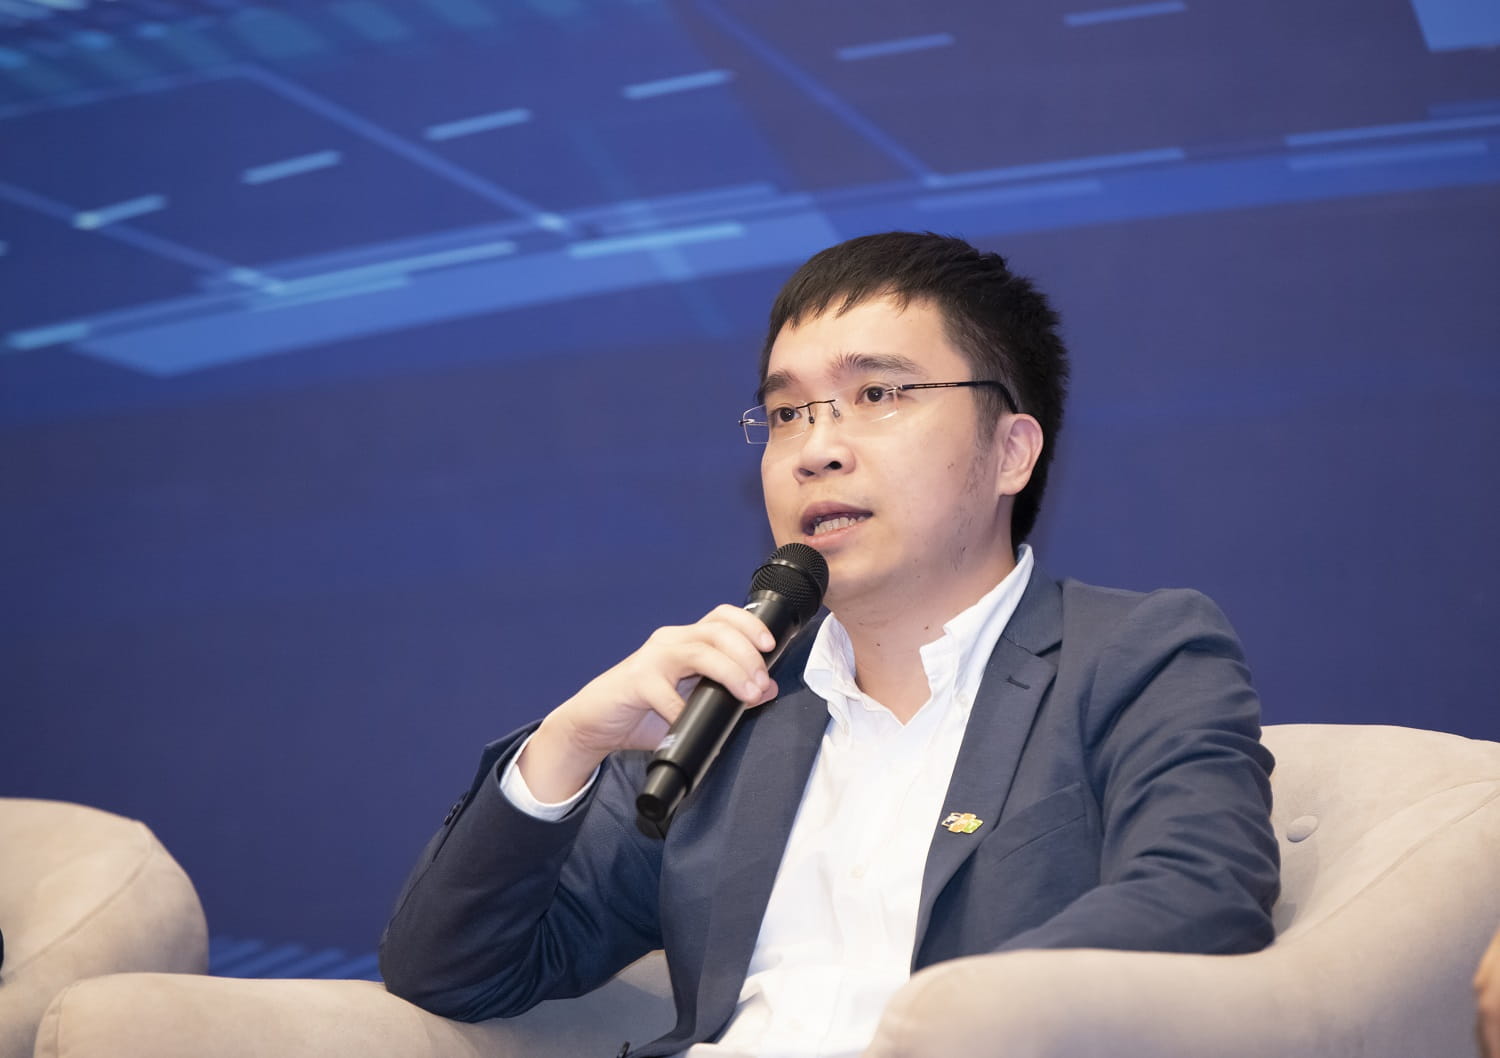 An overview of the "Young Vietnamese Entrepreneurs with Digital Transformation" conference that took place on November 8, 2022